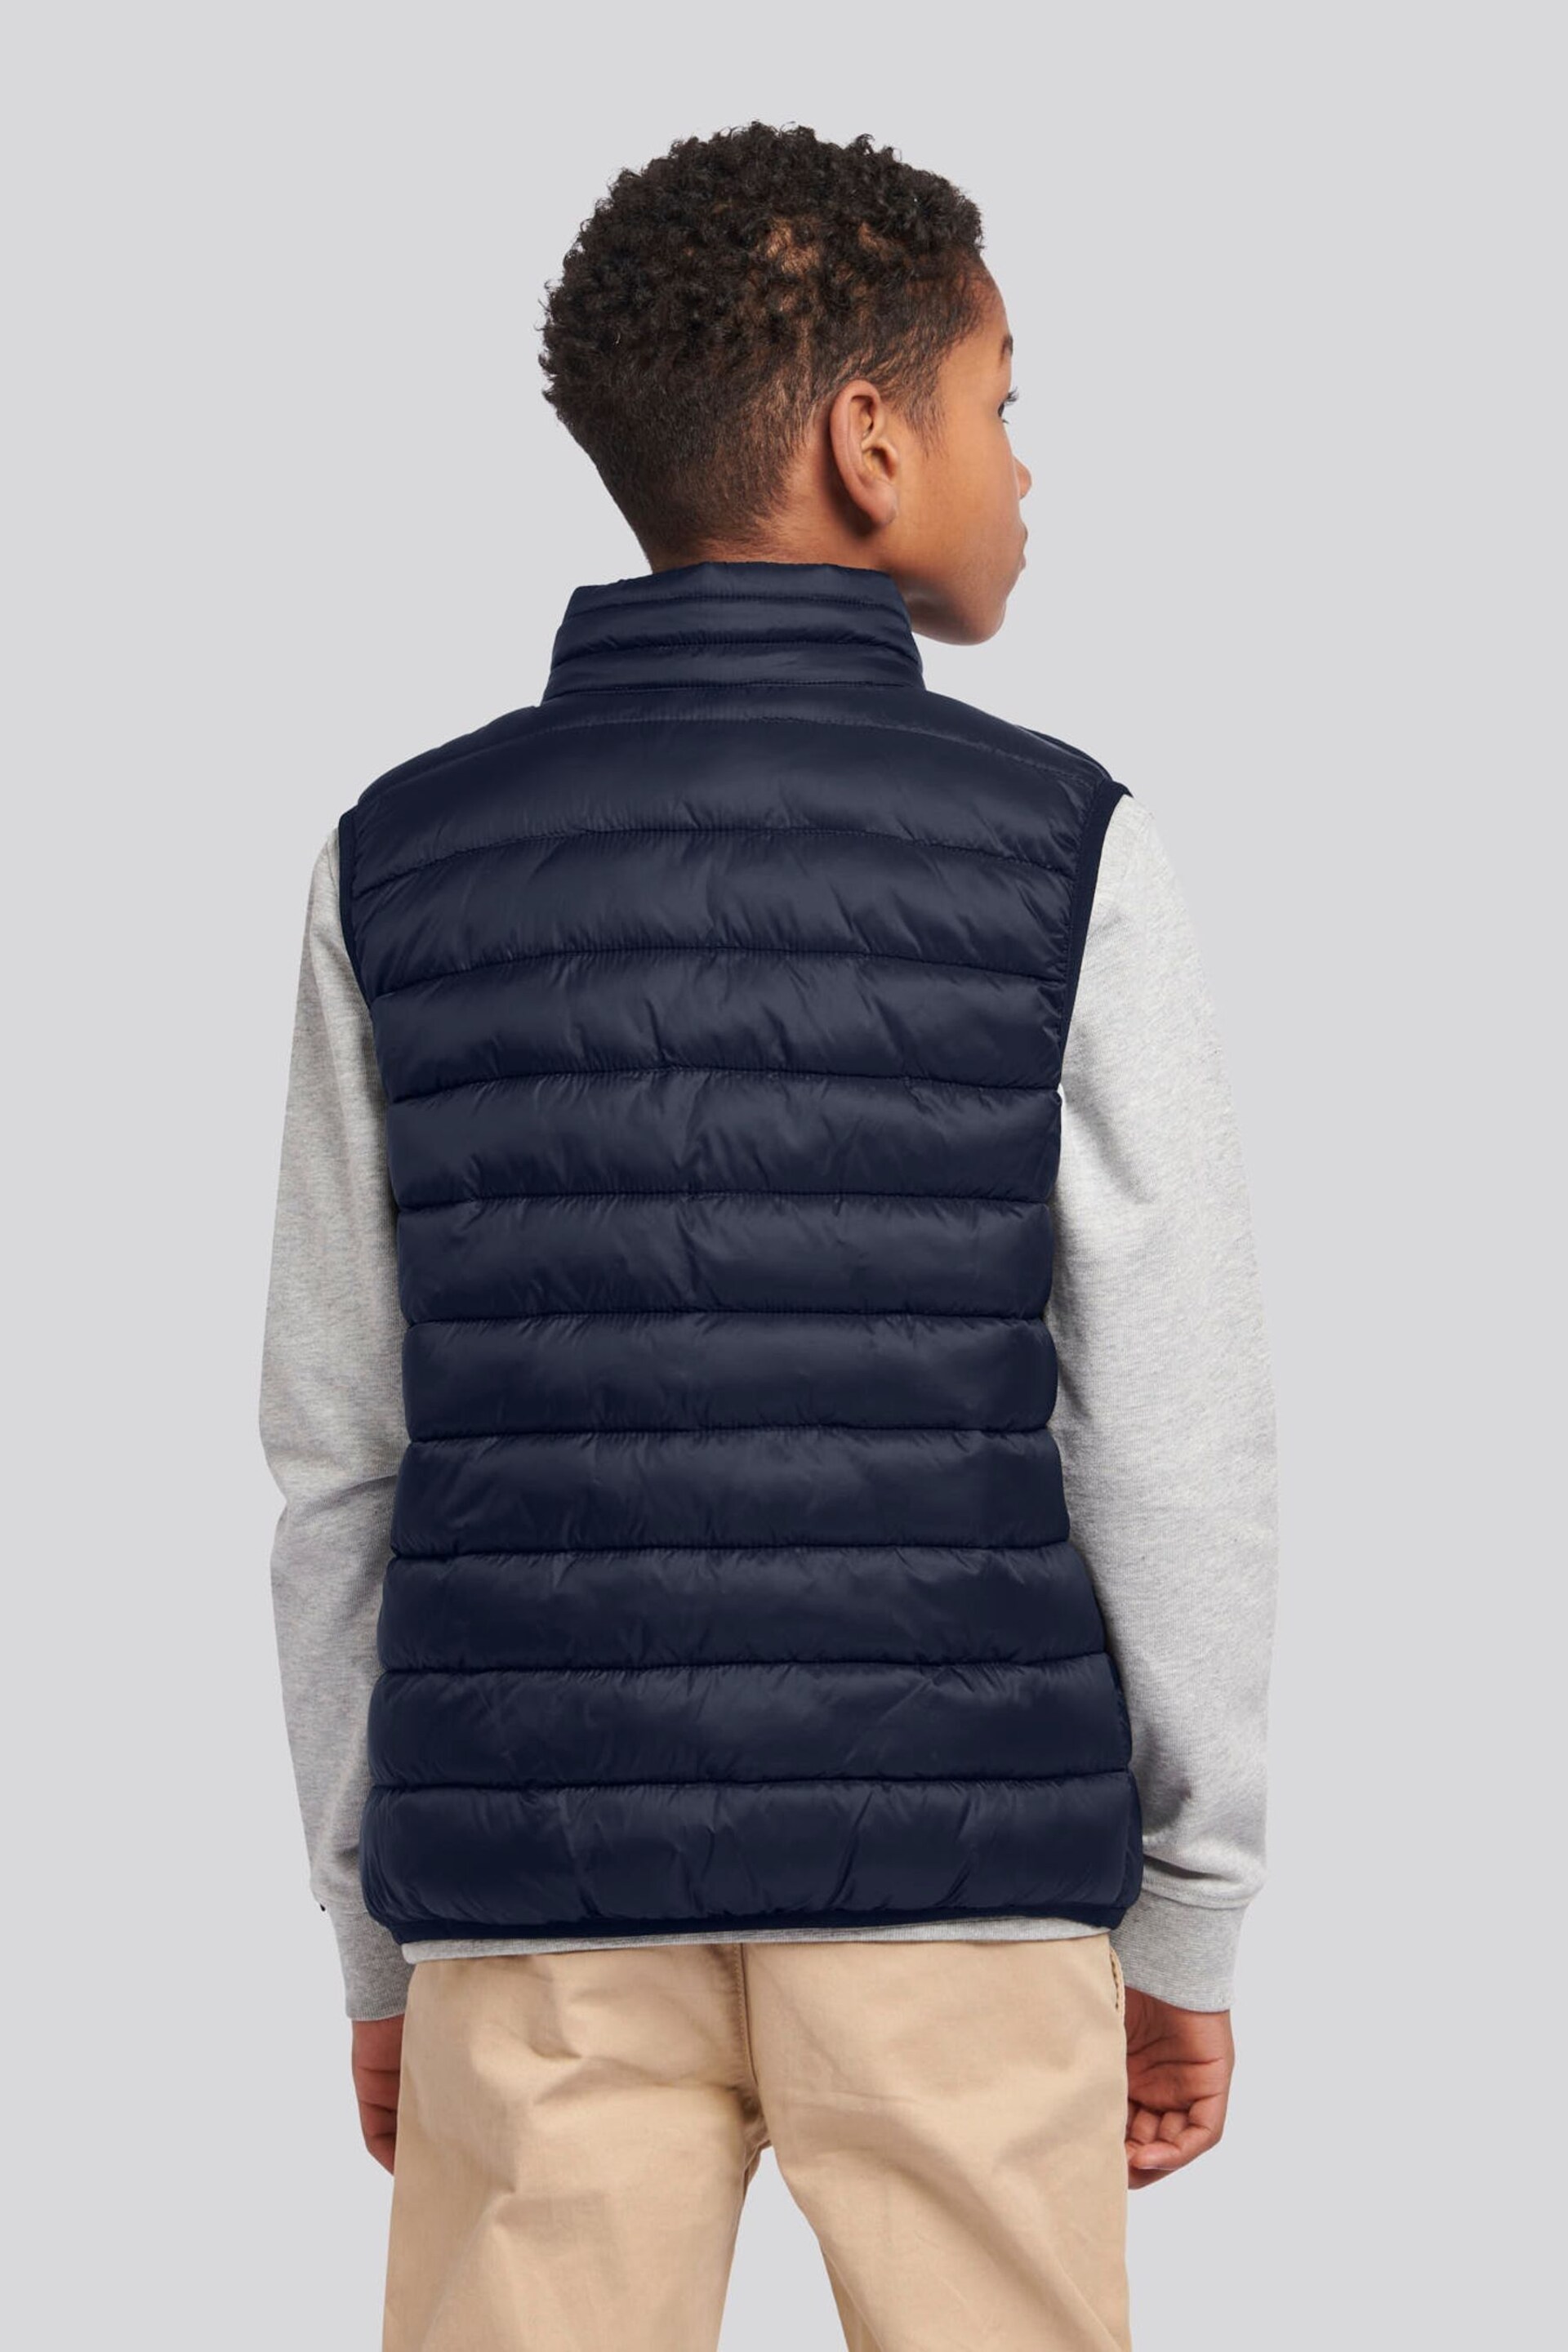 U.S. Polo Assn. Boys Bound Quilted Gilet - Image 2 of 3